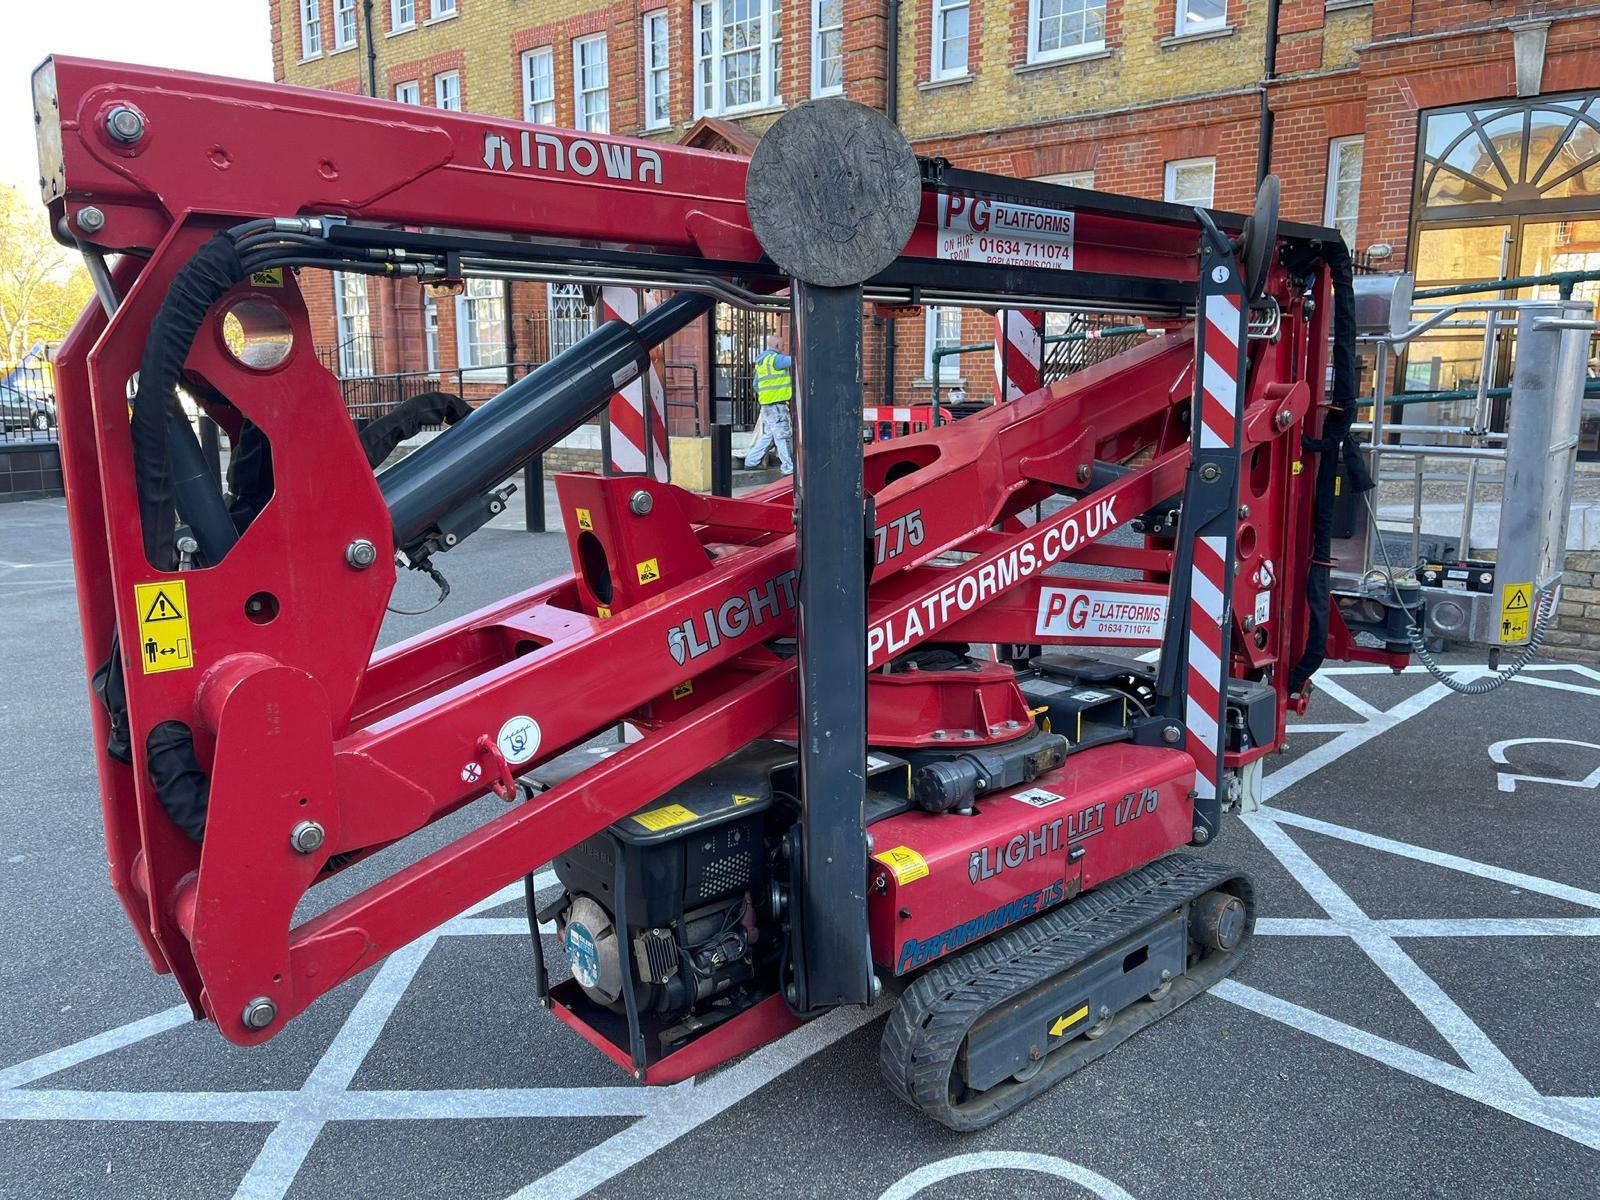 Hinowa 17.75 tracked spider lift hire from PG Platforms